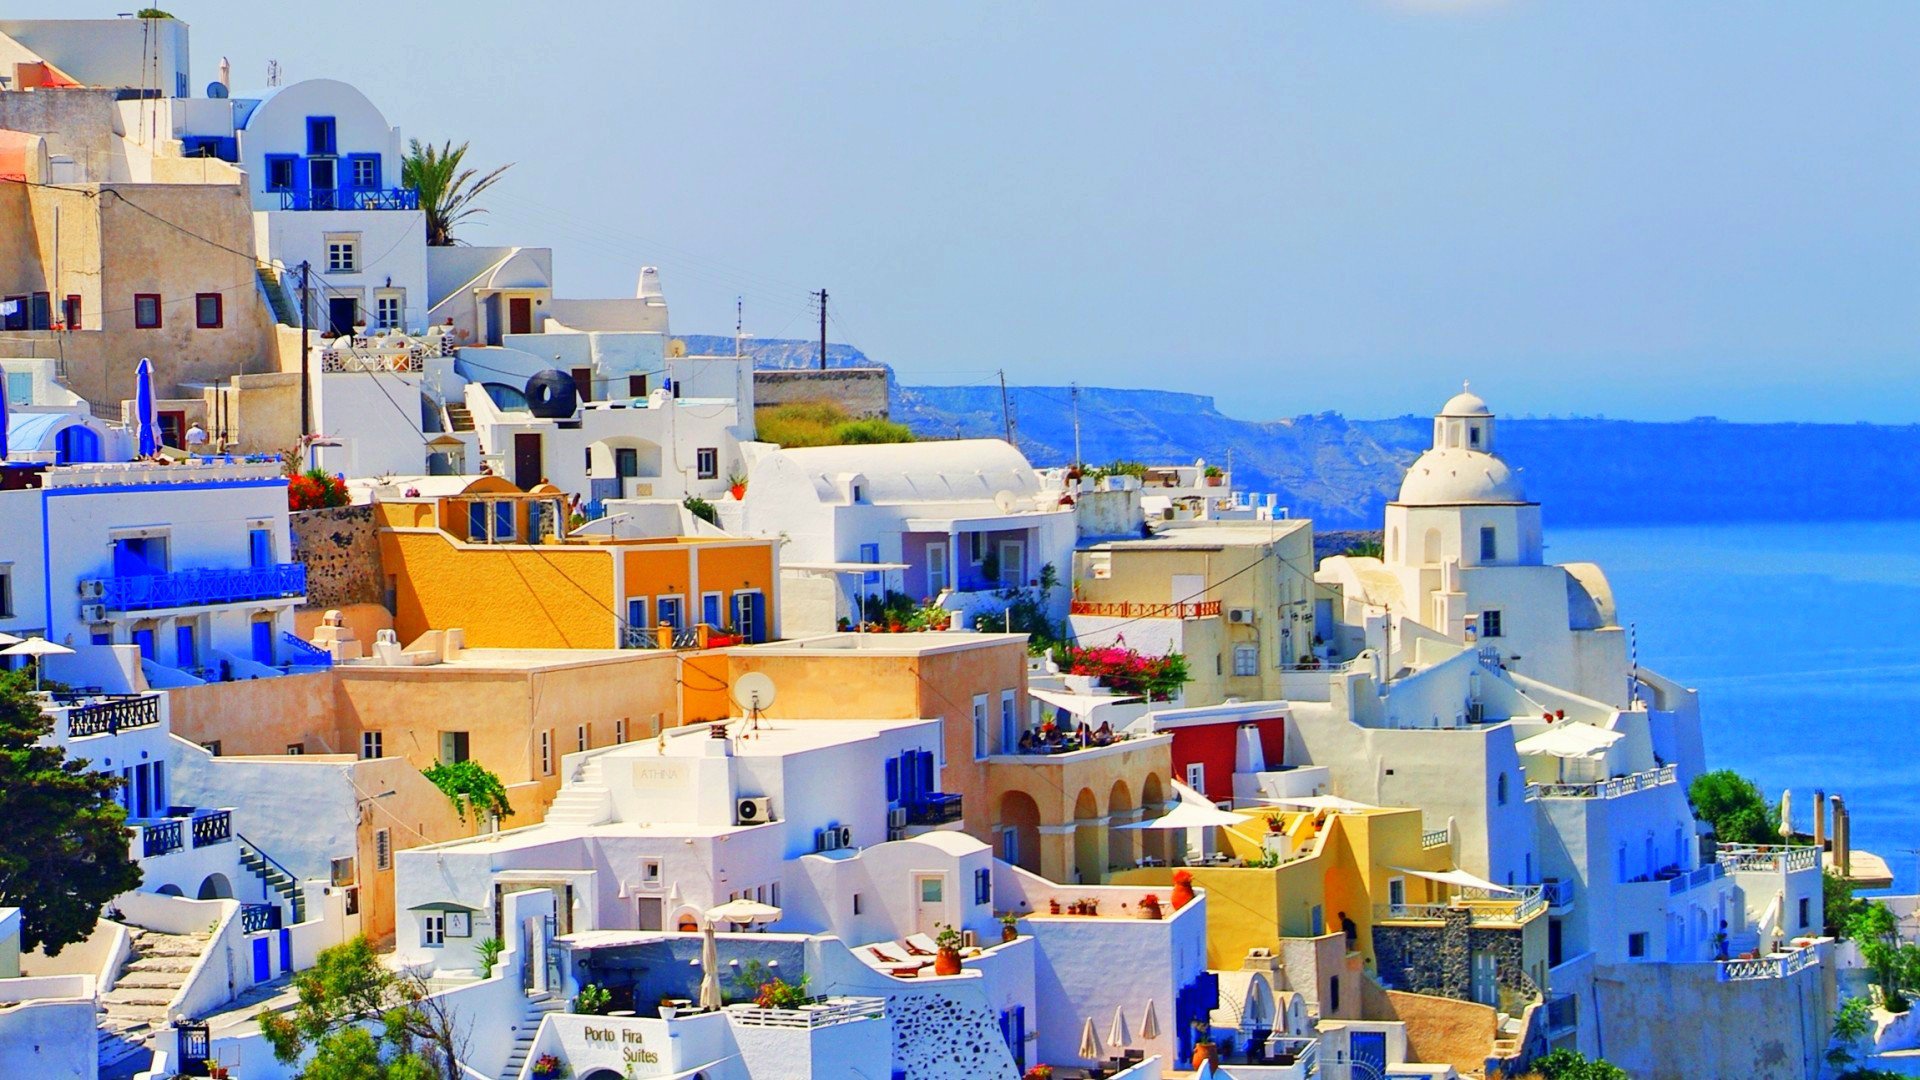 santorini, man made, architecture, bright, church, colors, greece, house, towns